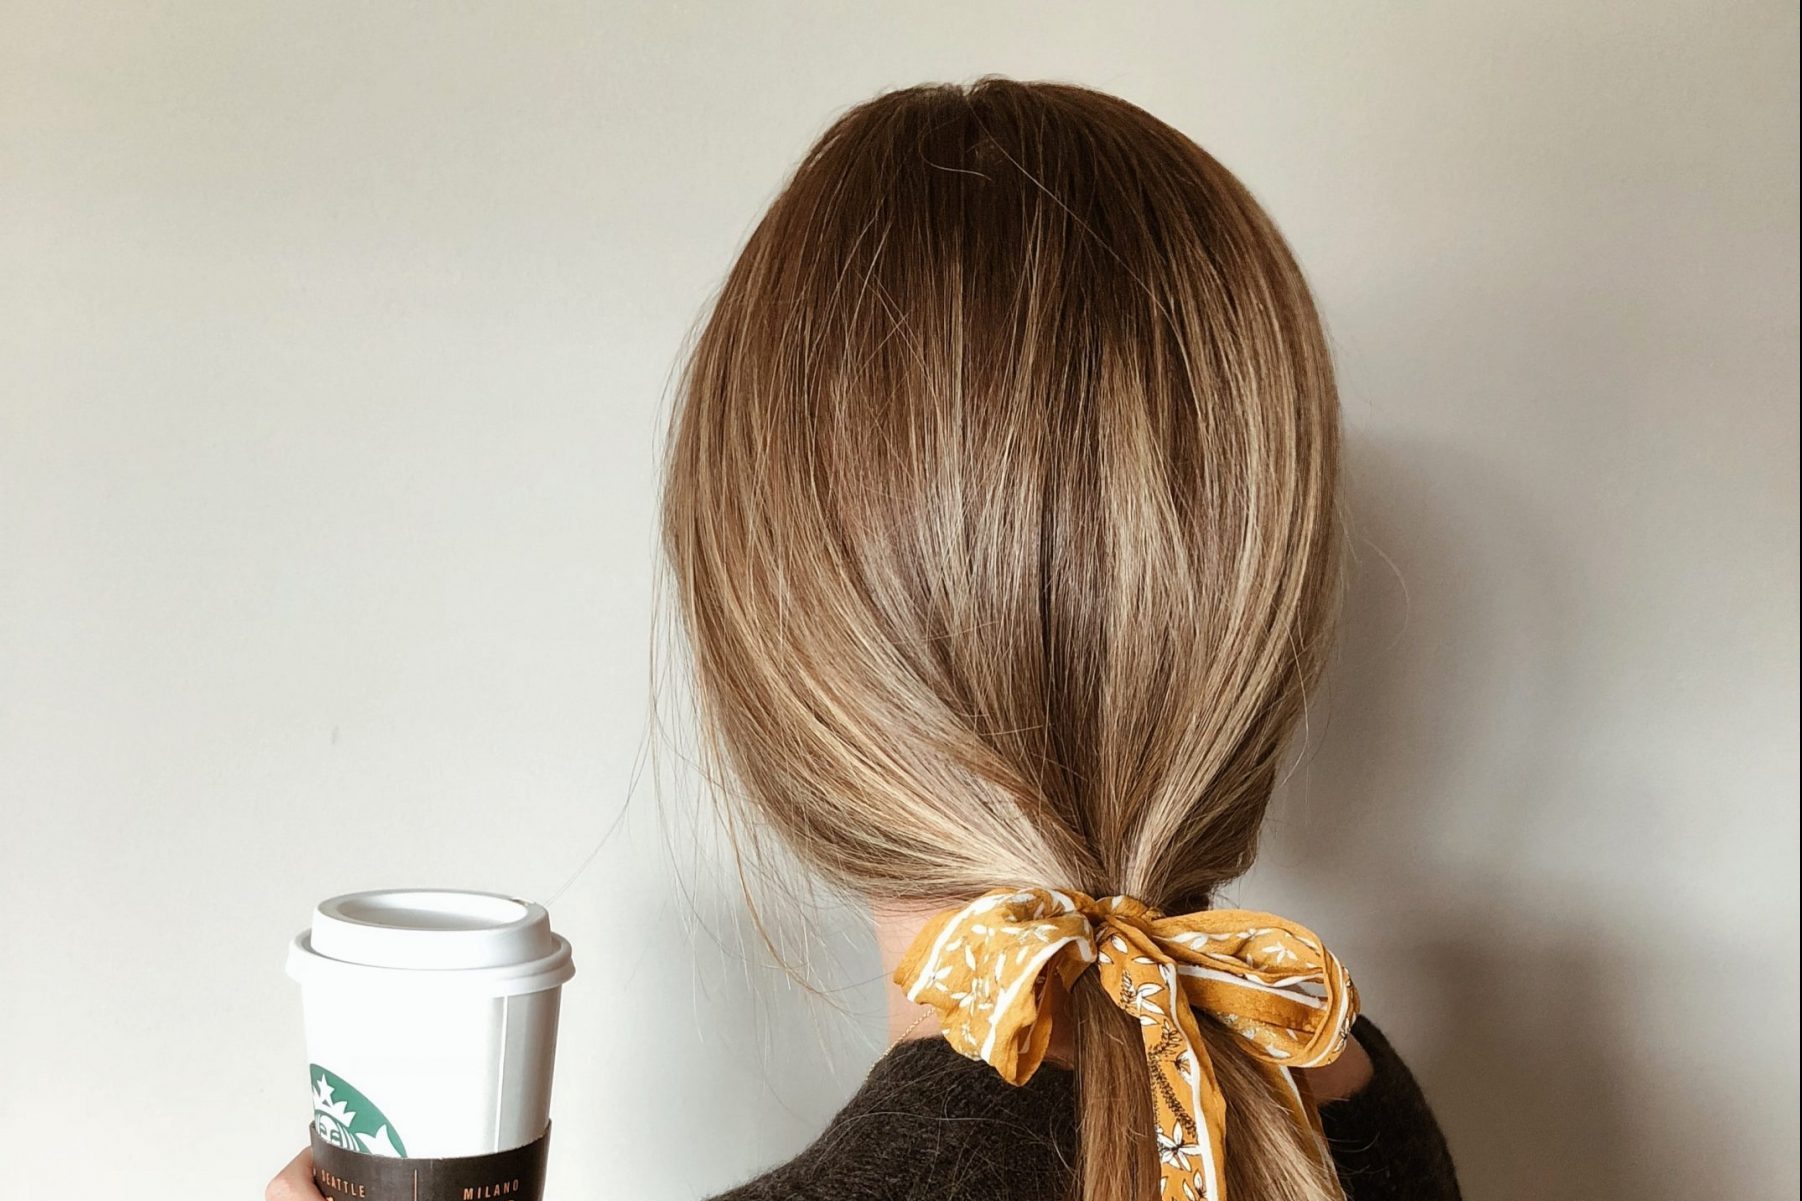 How To Style Your Hair for a Job Interview